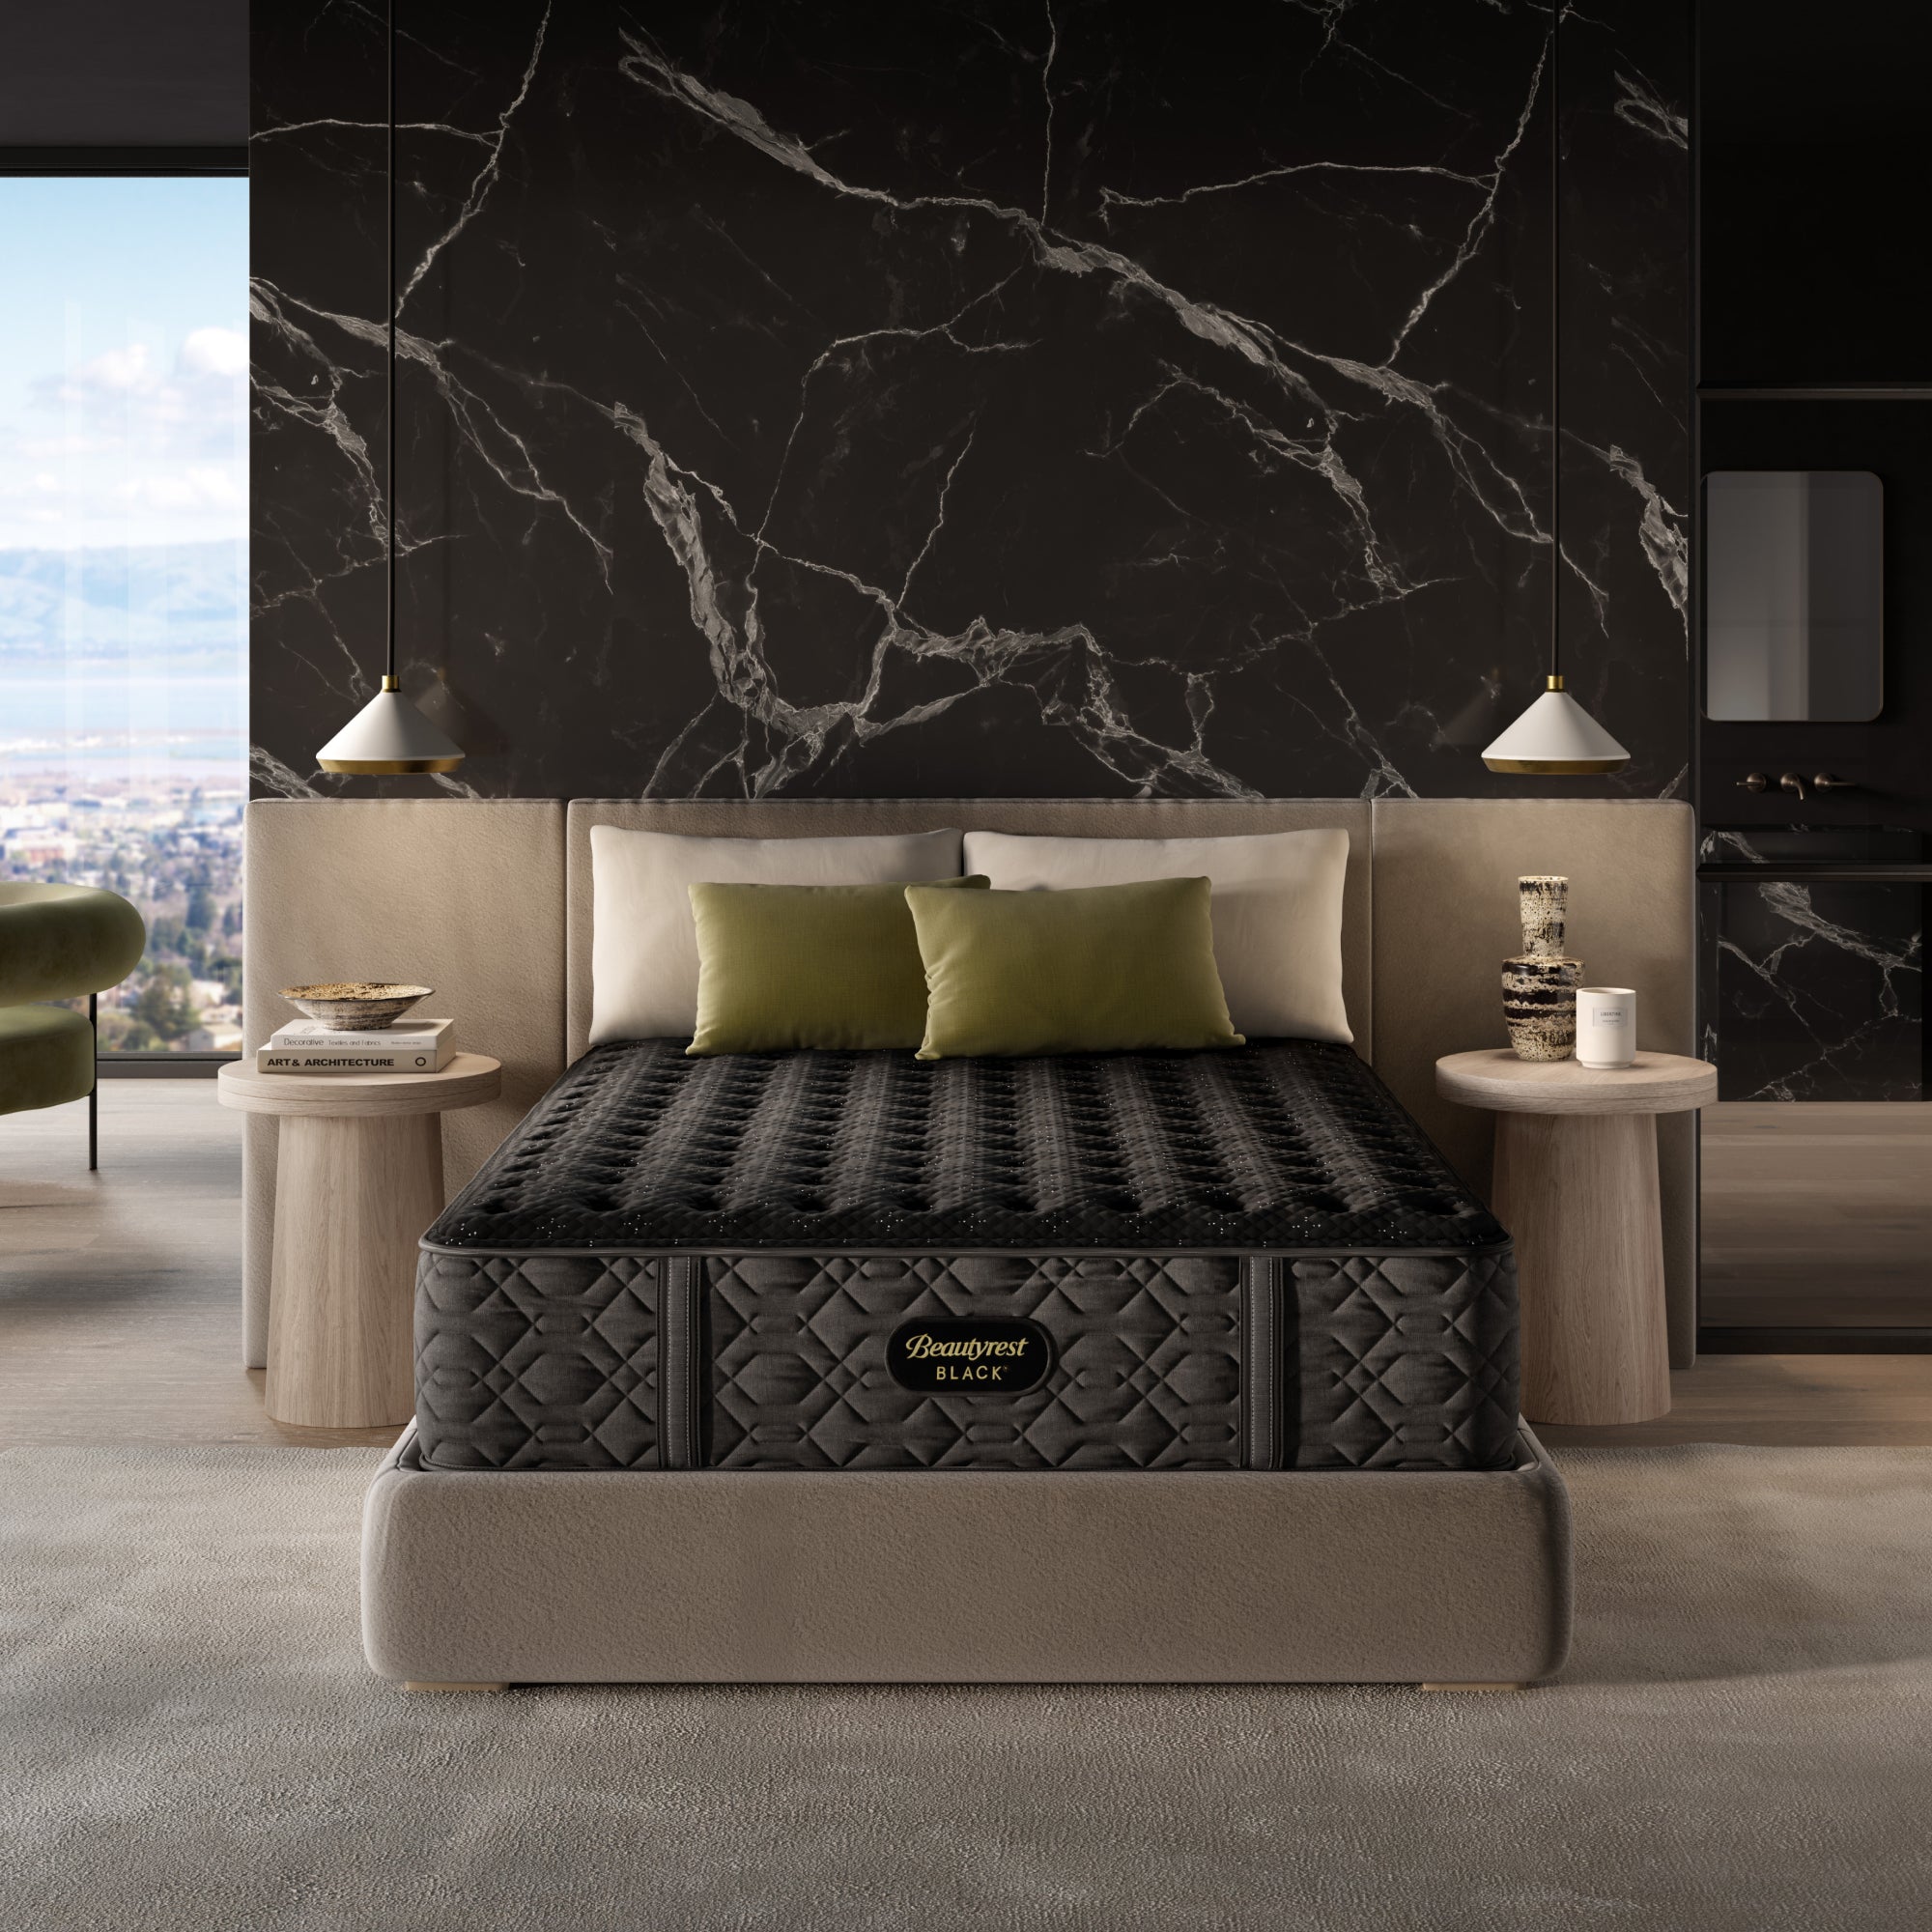 The Beautyrest Black firm mattress in a bedroom on a light brown bed frame || series: Series Three  || feel: firm